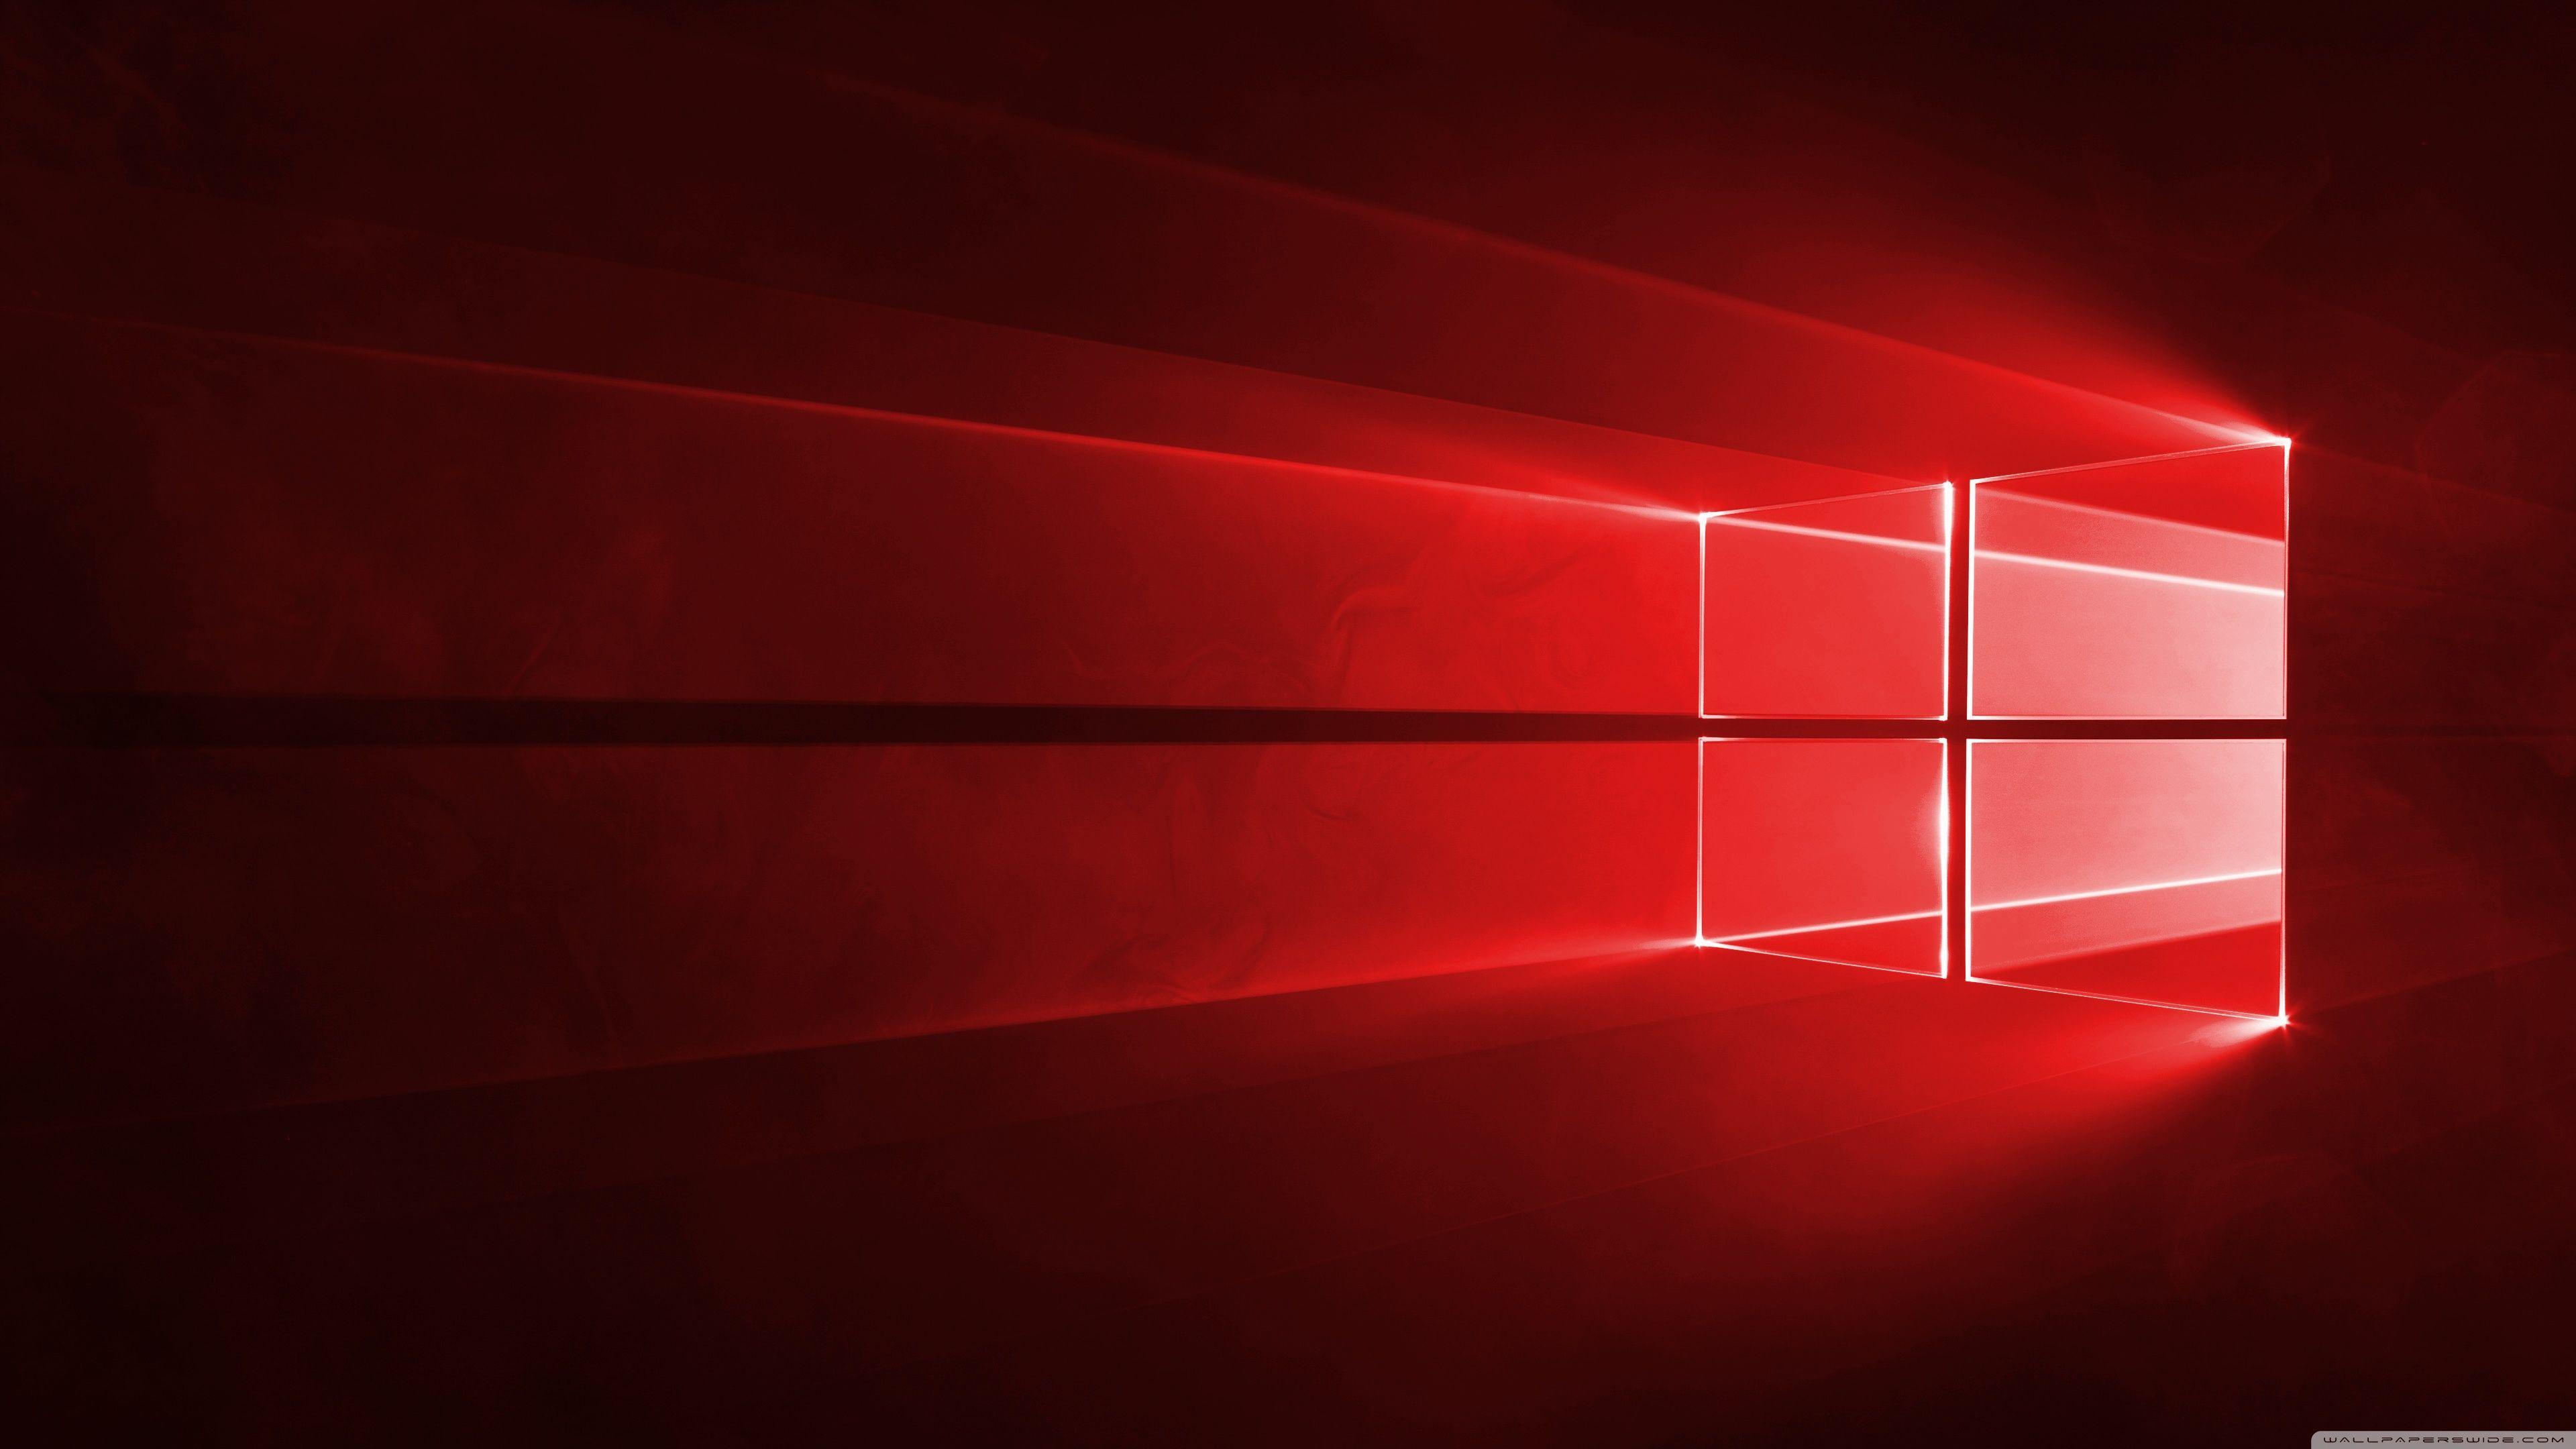 Red Windows Wallpapers - Top Free Red Windows Backgrounds